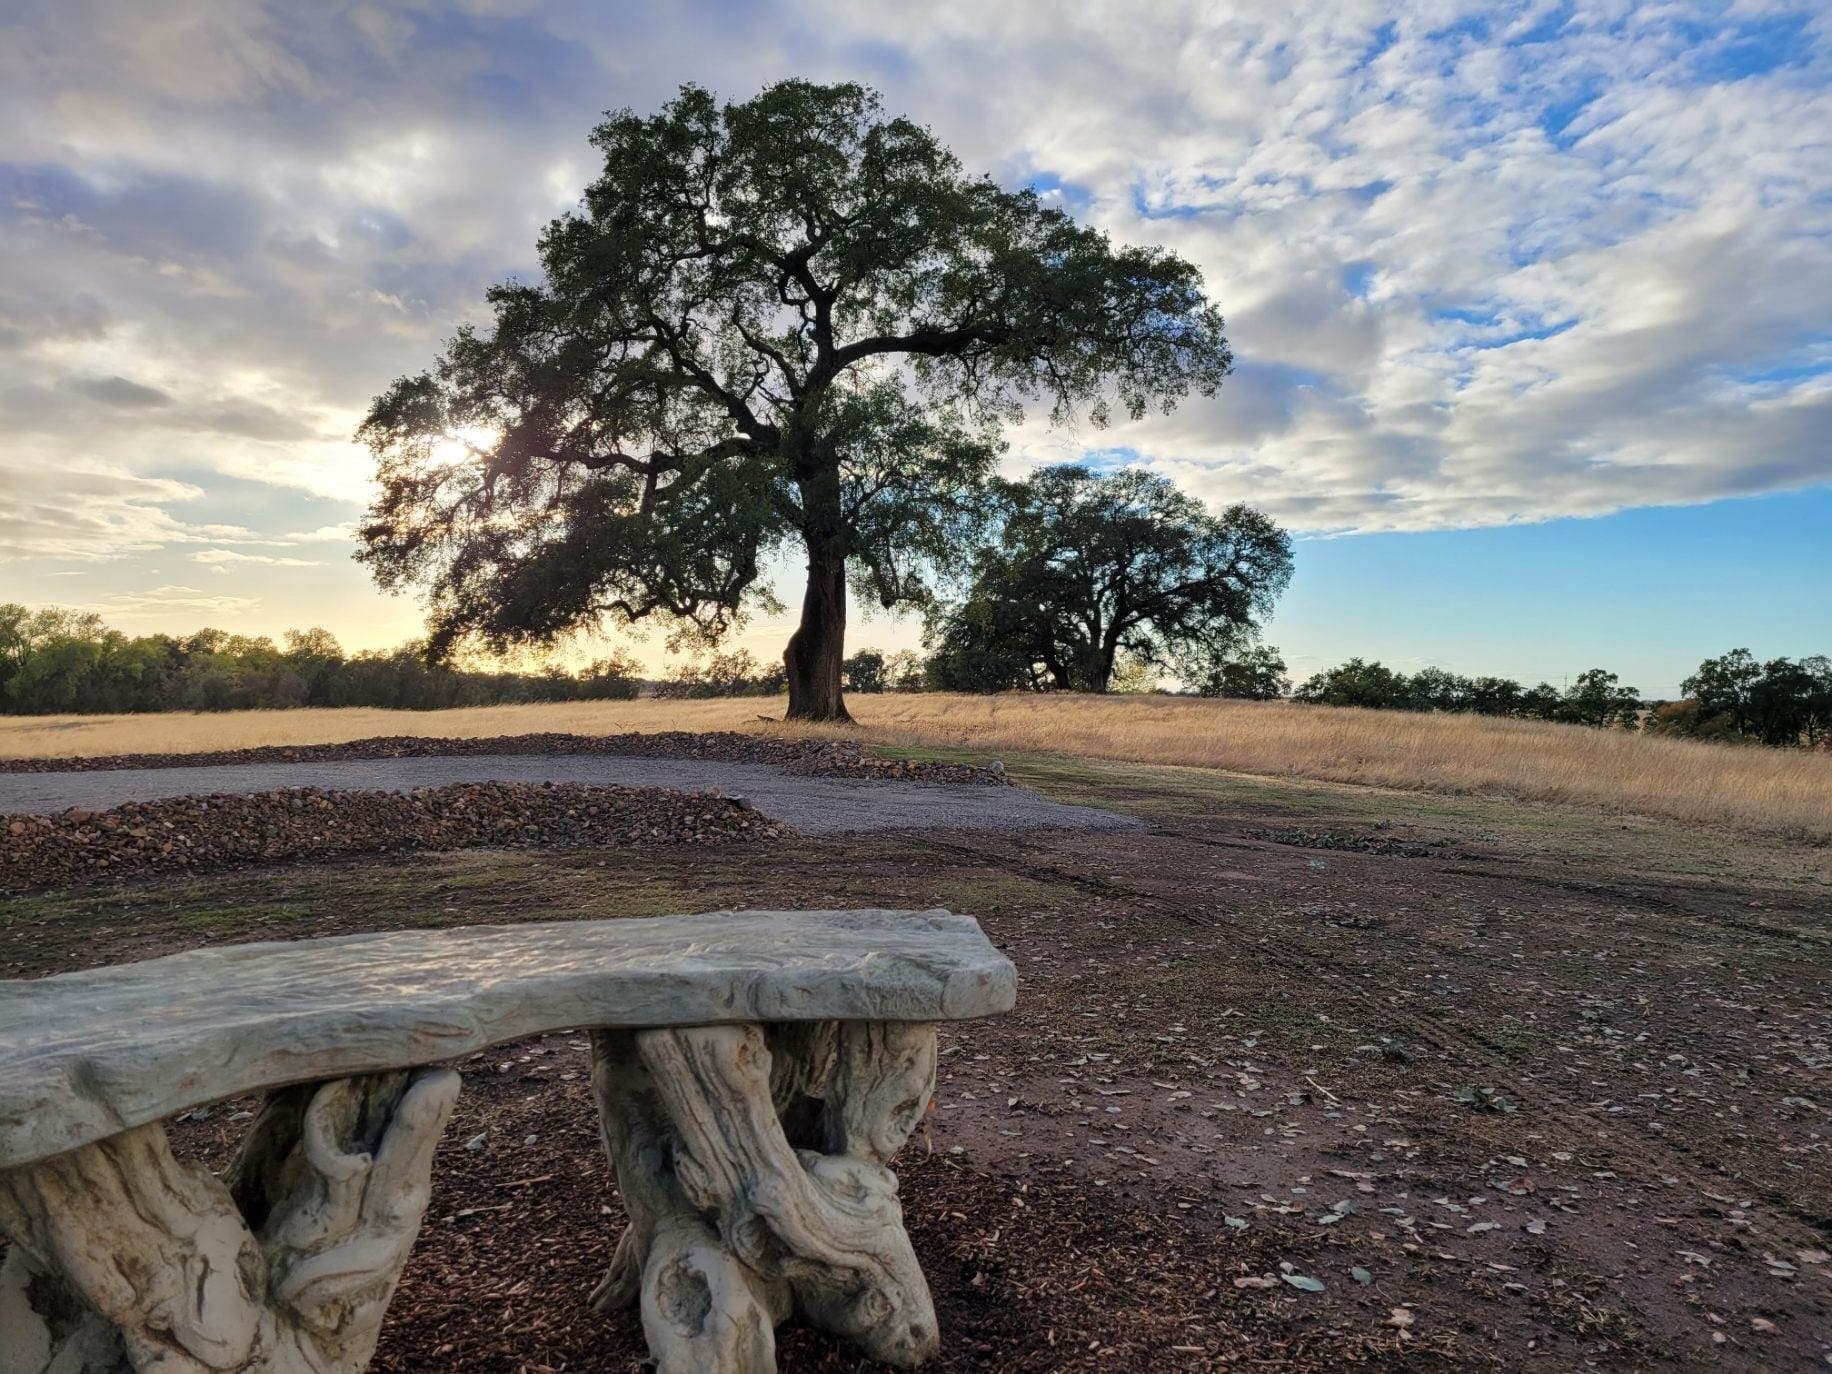 Rustic bench overlooking the beautiful natural landscape